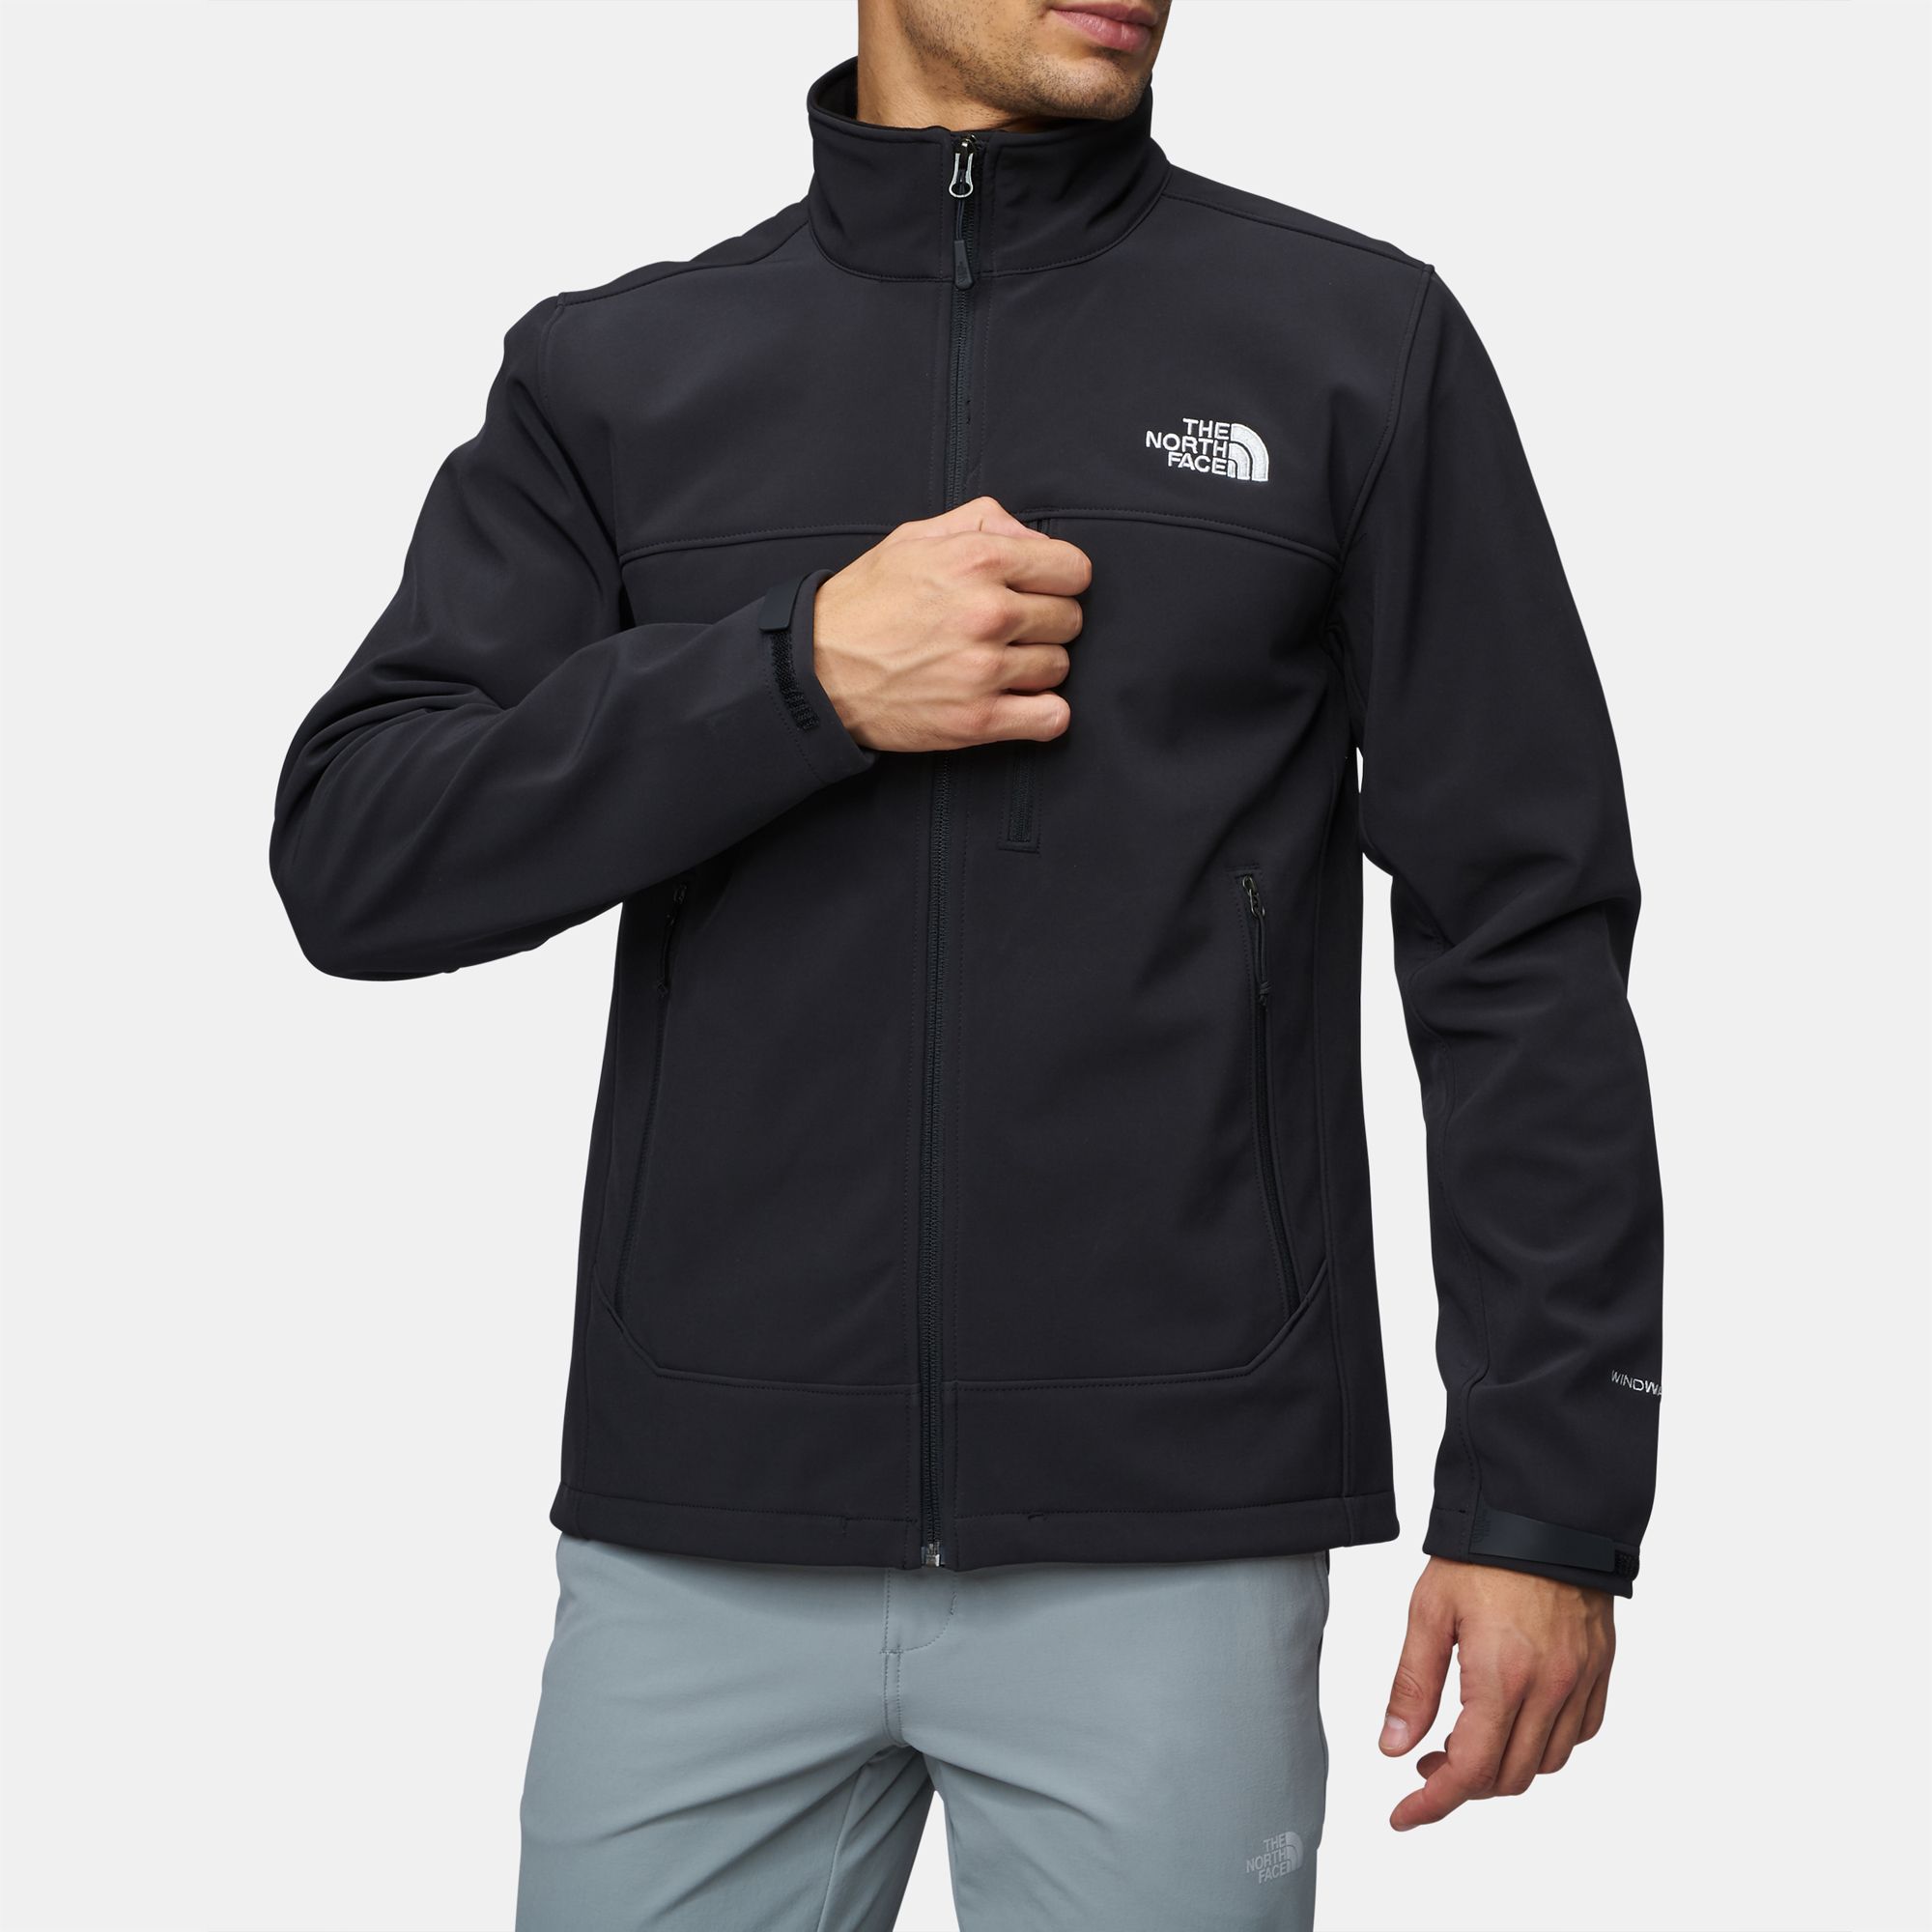 north face bionic 2 jacket